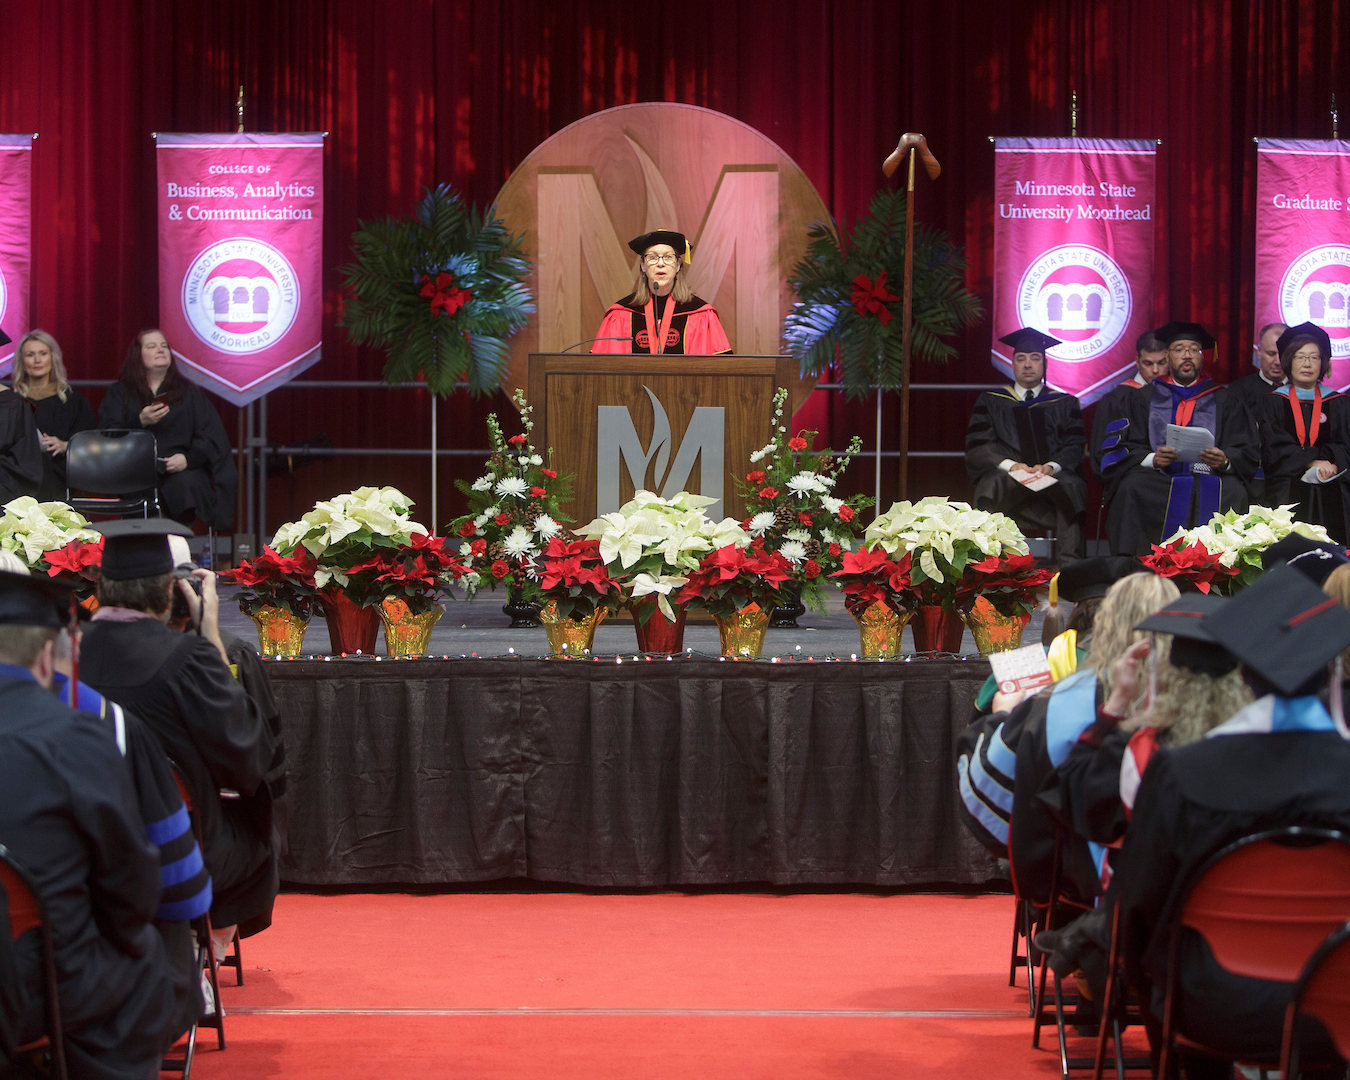 More than 800 MSUM students to graduate May 12